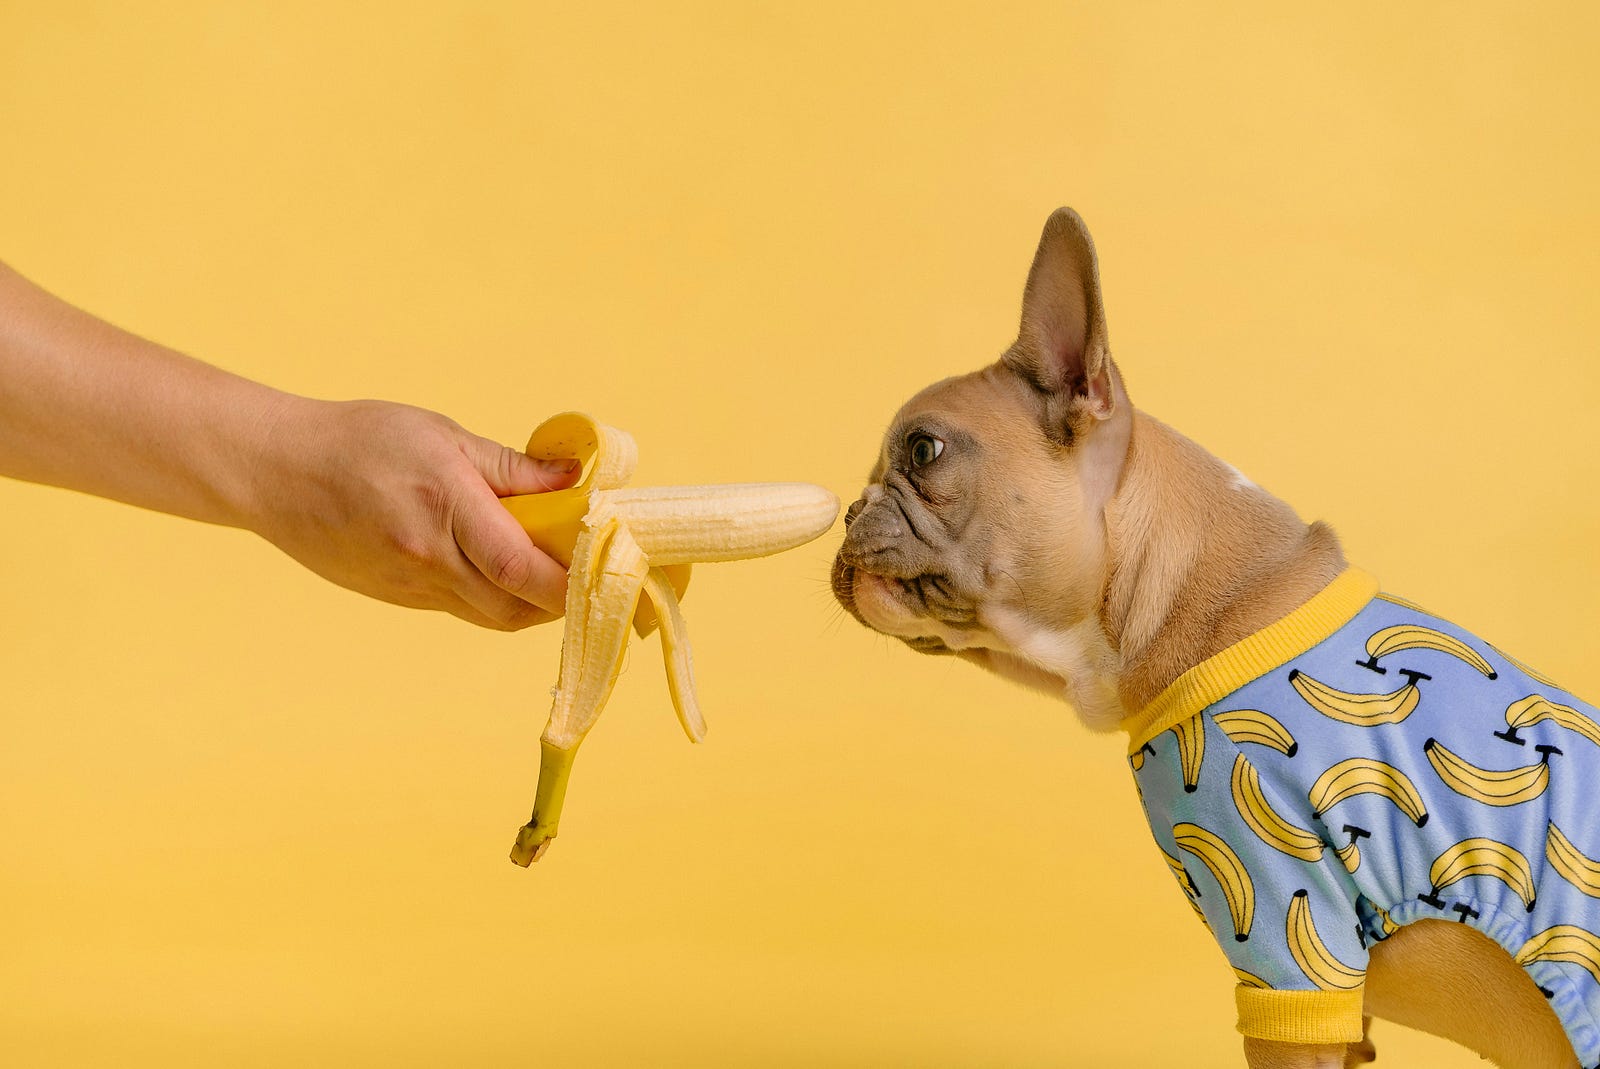 Looking At Other Men’s Bananas